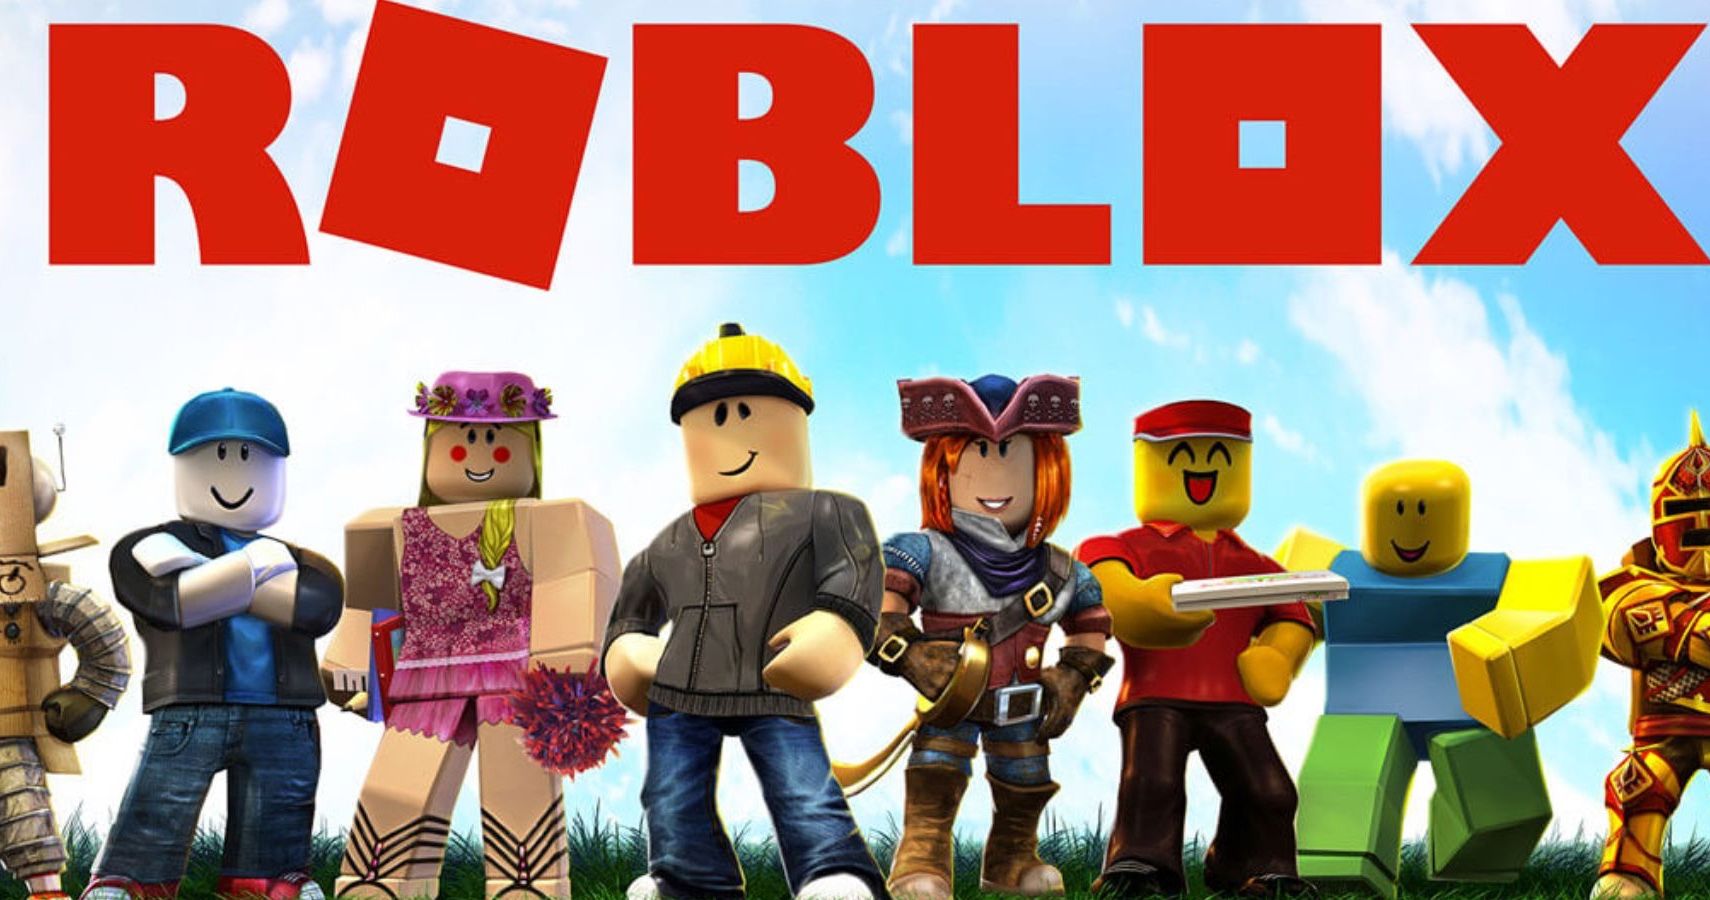 Roblox Players Will Have To Pay For The Game S Iconic Oof Death Sound - who voiced the roblox death sound